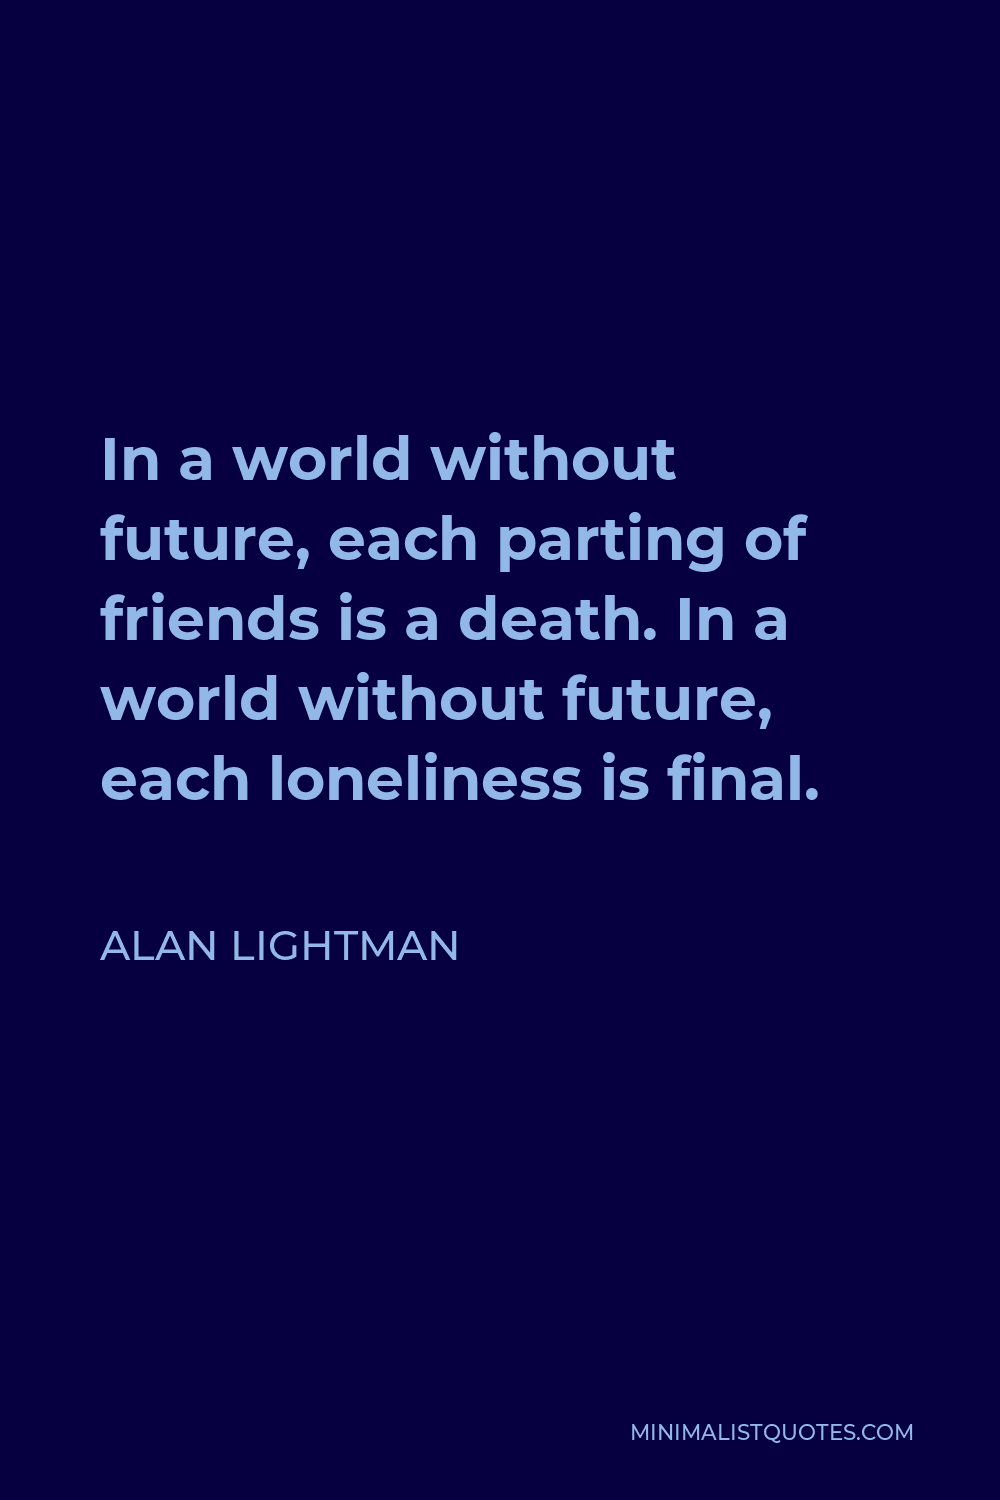 Alan Lightman Quote - In a world without future, each parting of friends is a death. In a world without future, each loneliness is final.